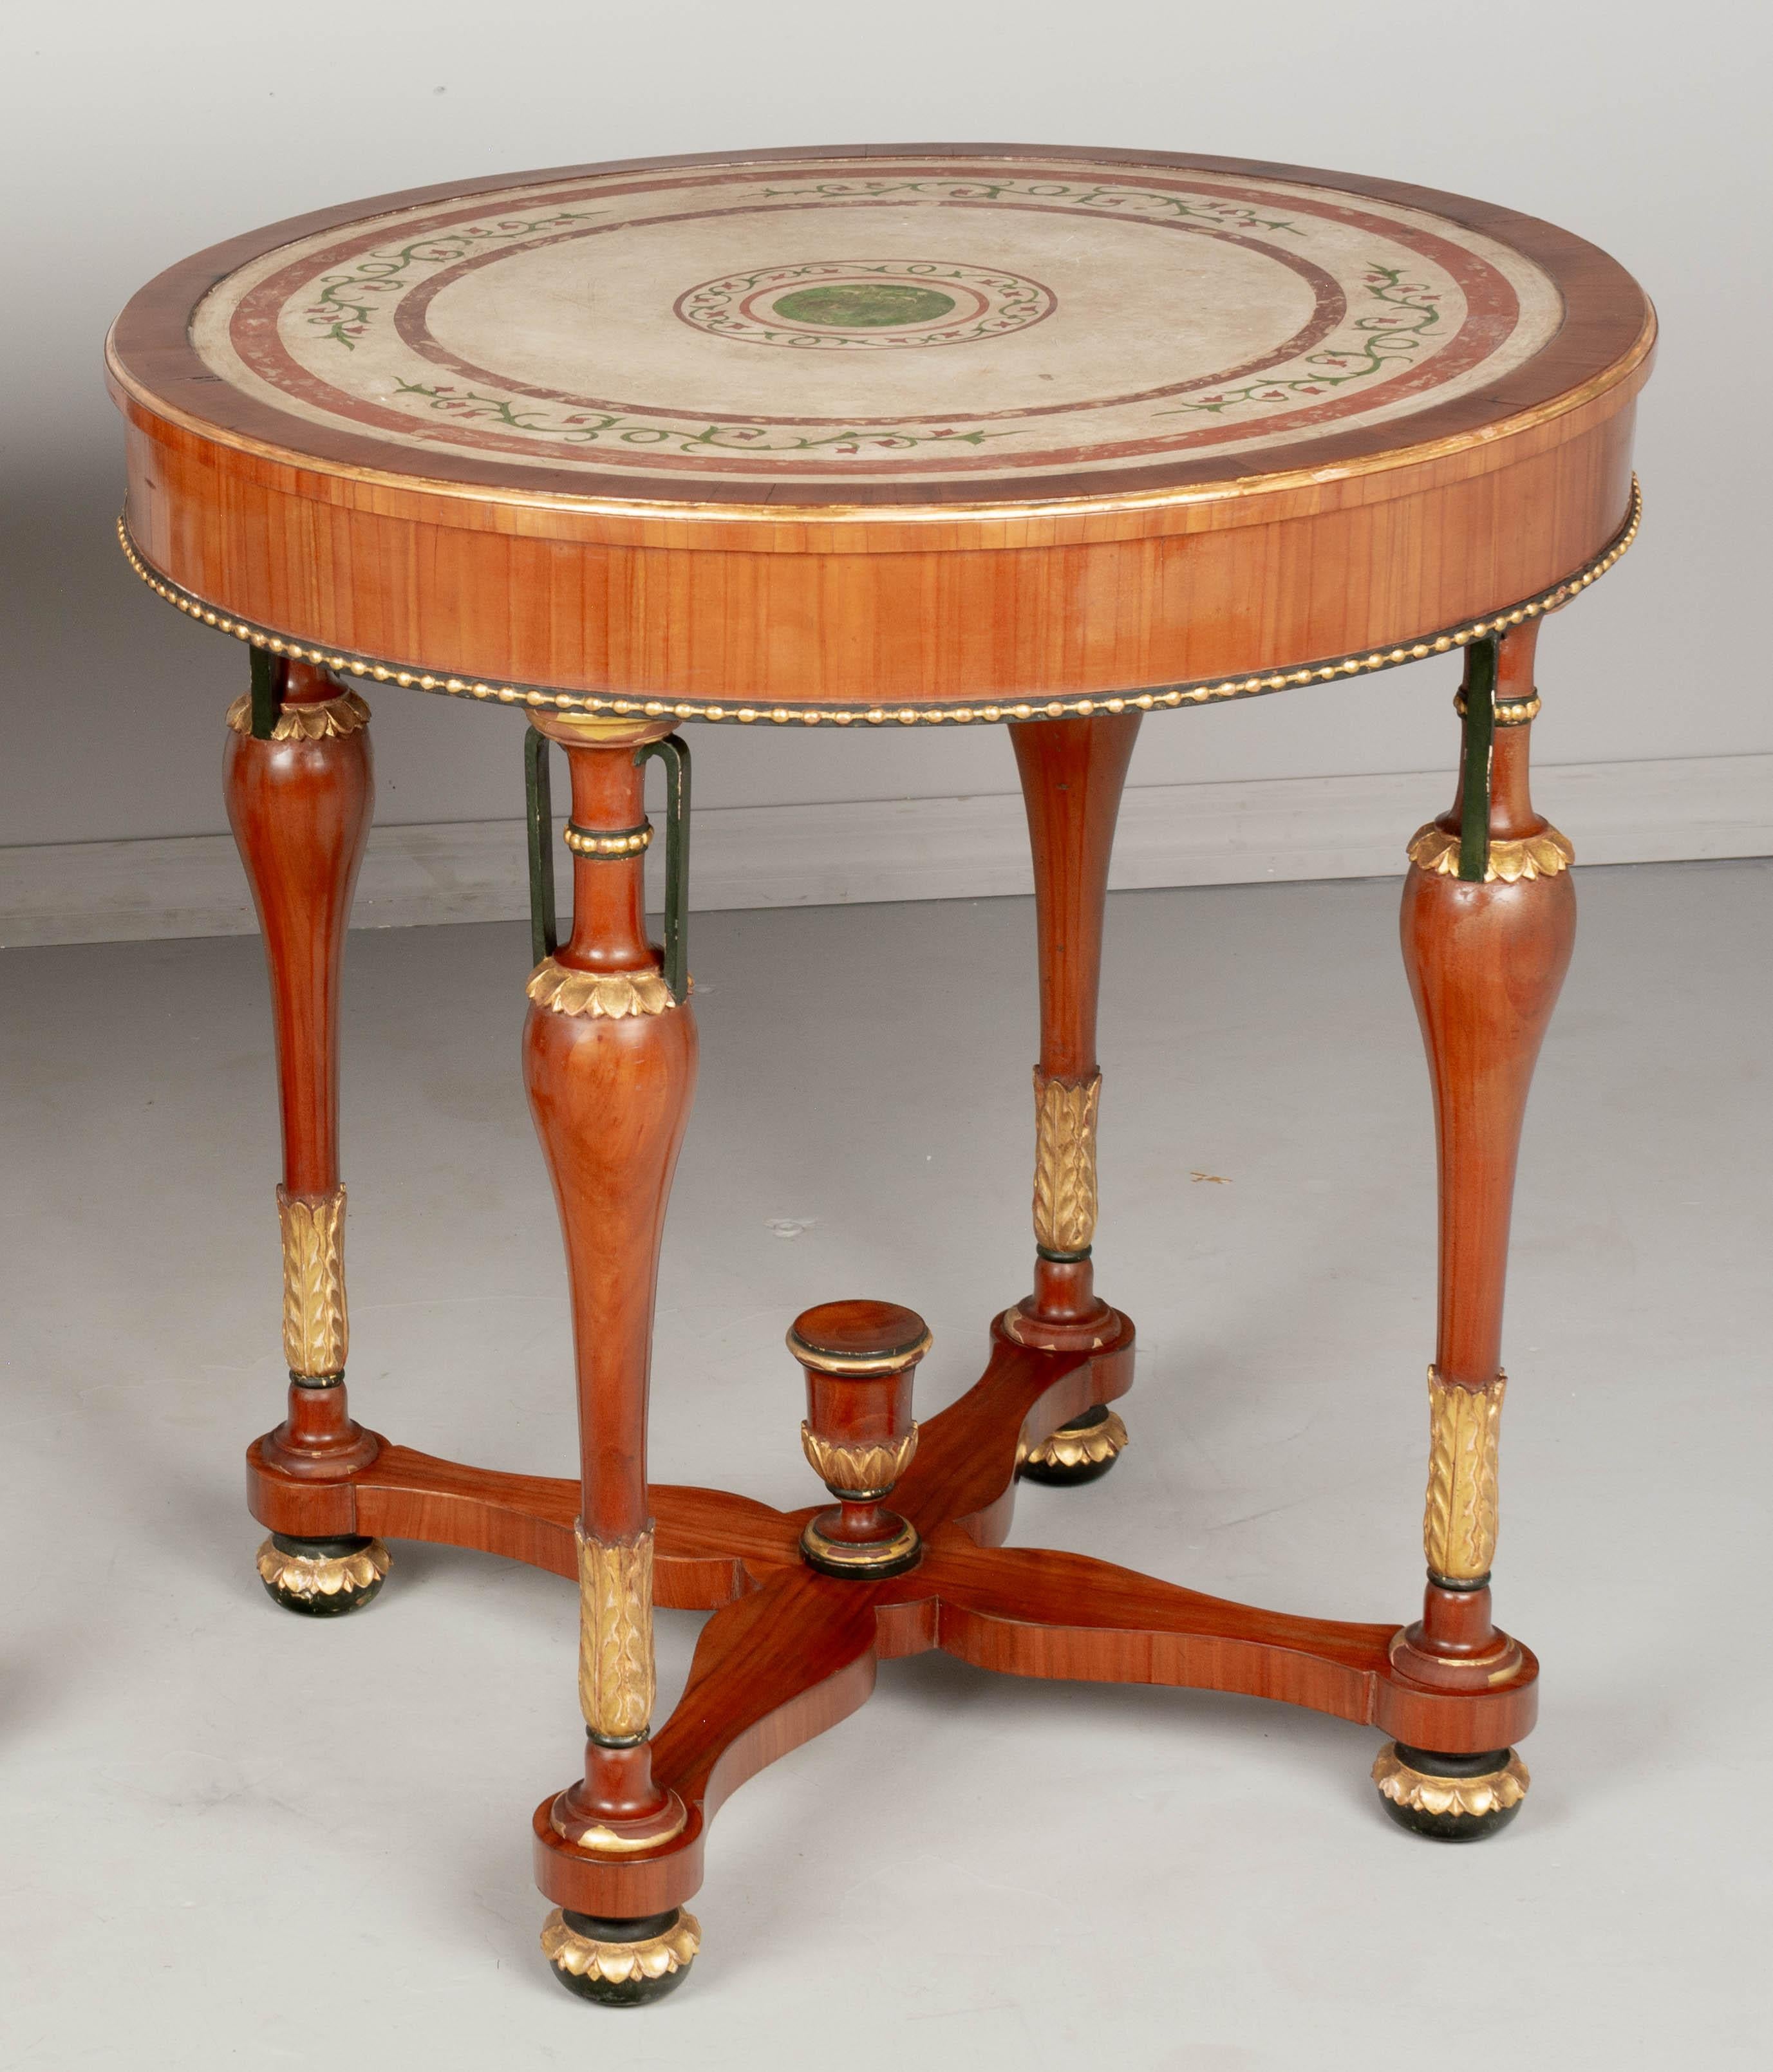 An Italian Neoclassical circular center table made of solid and veneer of cherry. The top is scagliola, a hand-painted plaster technique that resembles inlays in marble. Elegant turned legs with urn forms and gilded foliate decoration with bead